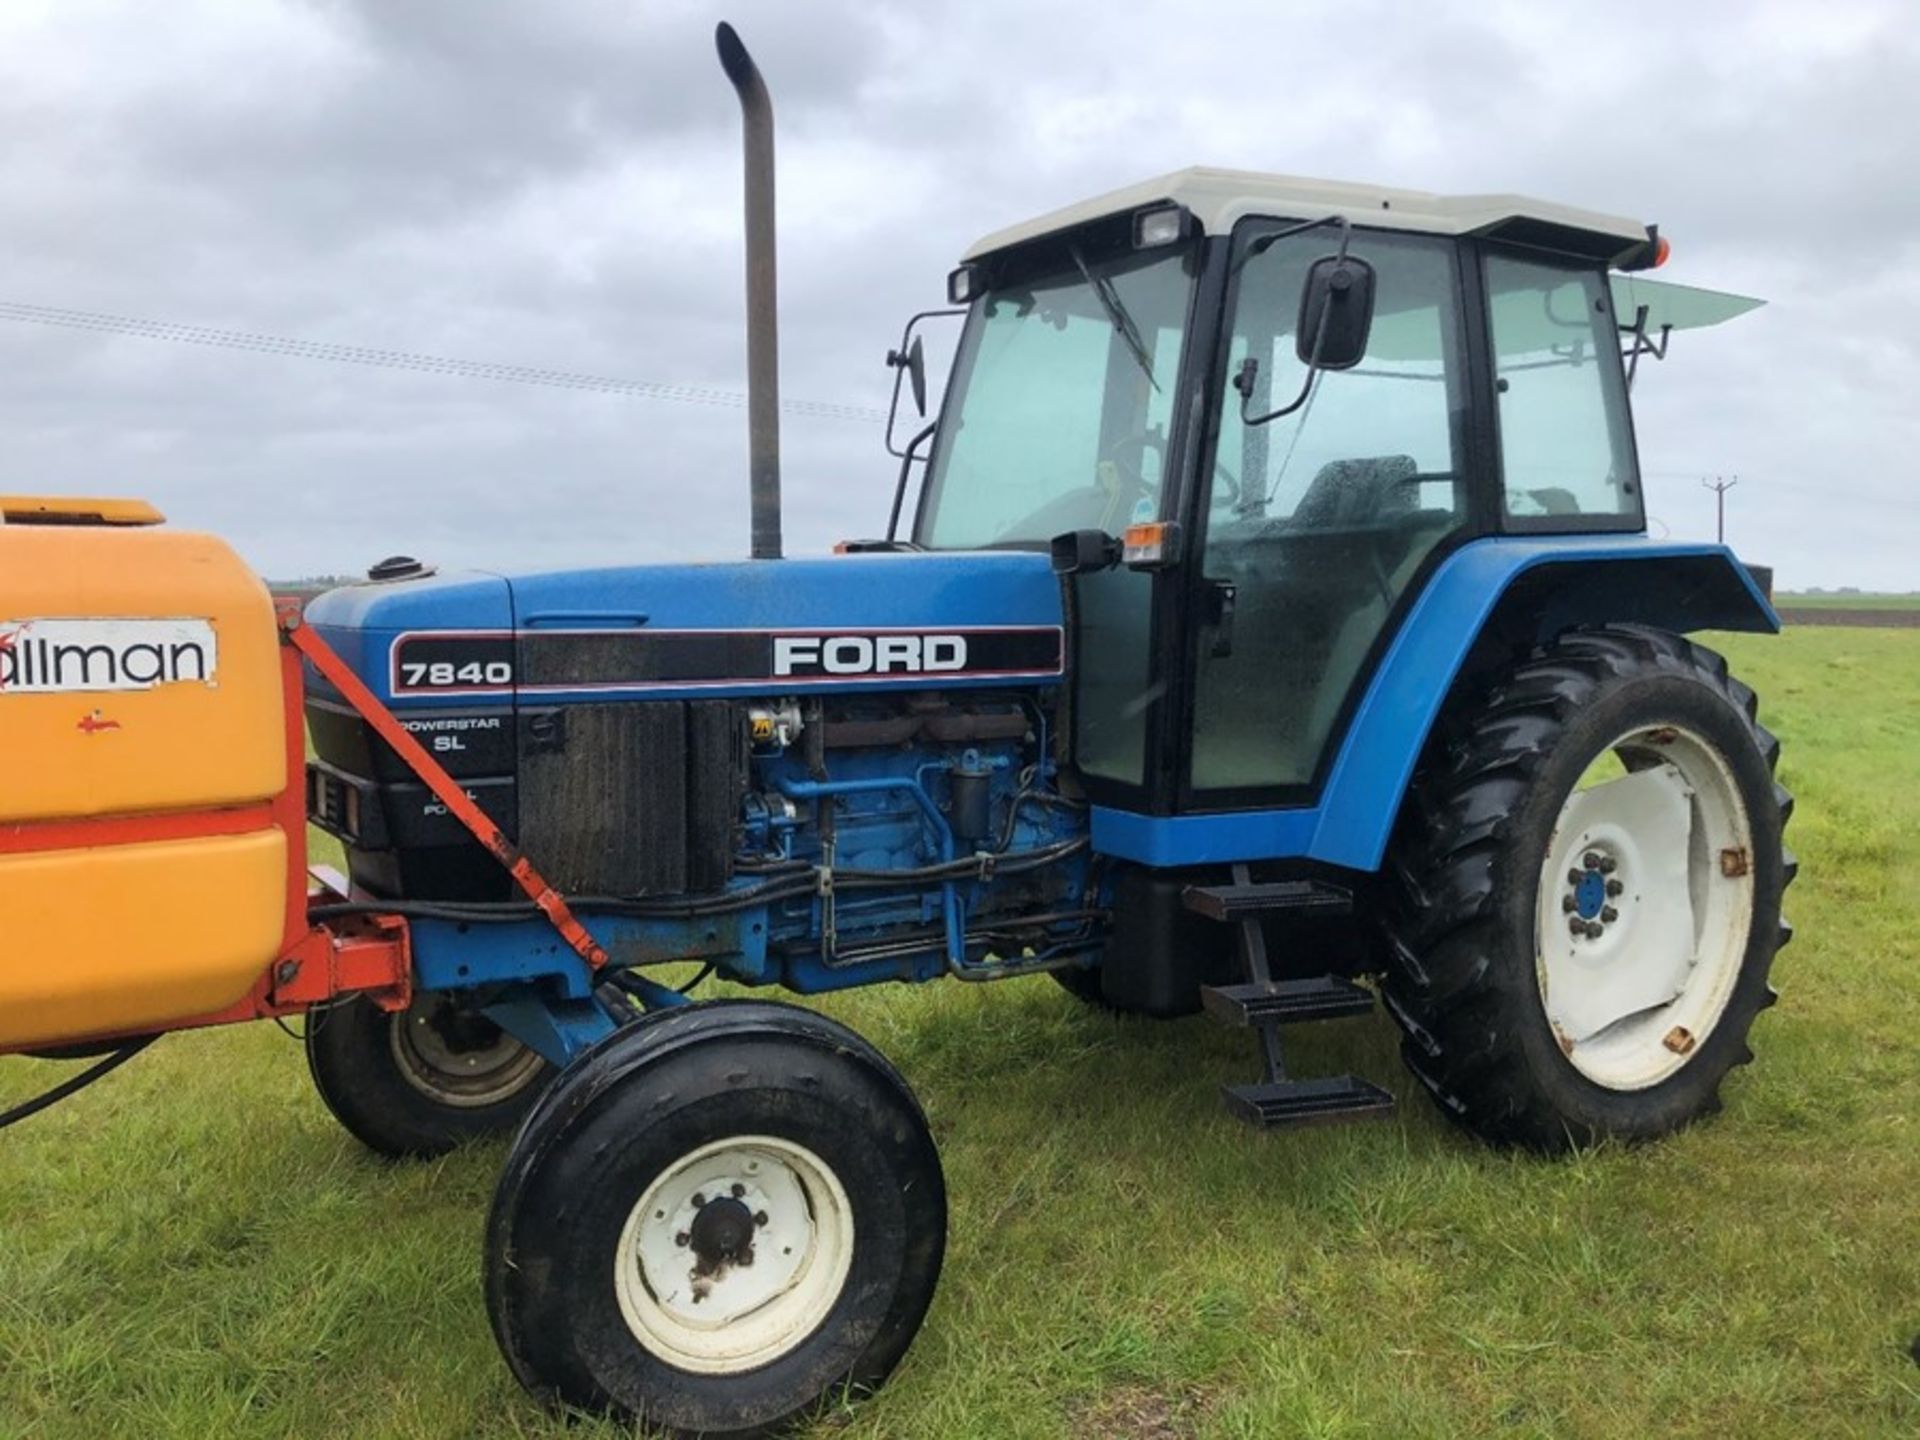 (94) Ford 7840 Powerstar SL 2wd tractor, 4,551 hours, dual power. air con, Reg L56 UVL, Rear 13.6 - Image 5 of 11